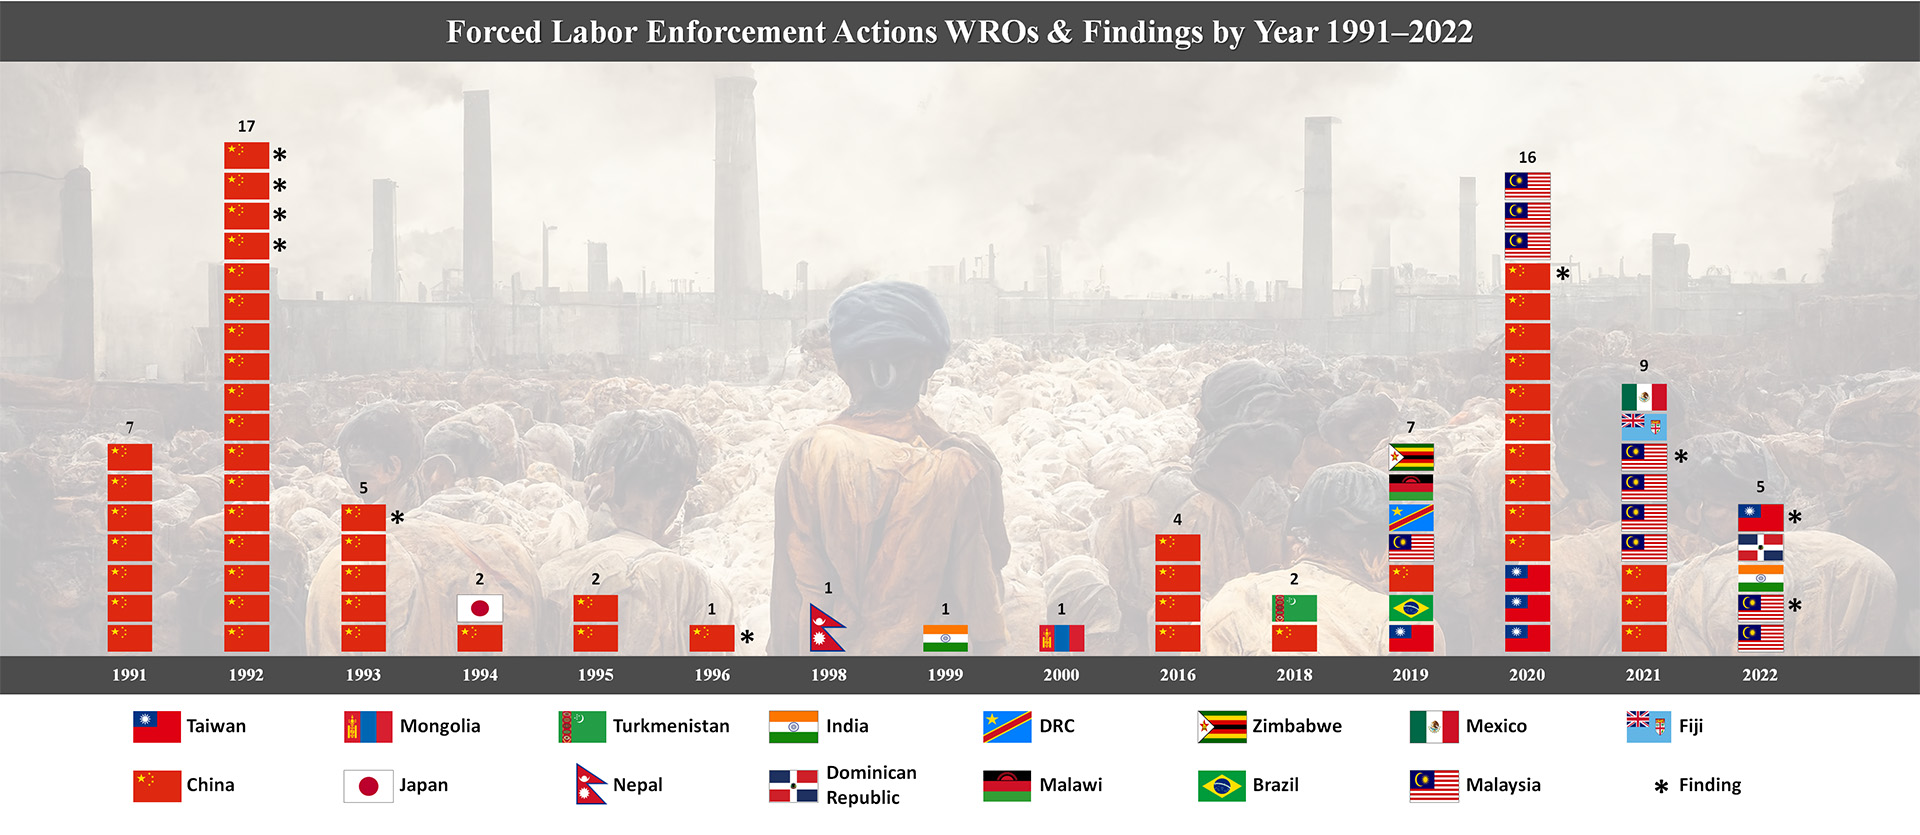 Forced Labor Enforcement Actions. WROs & Findings by Year 1991-2022. Since the creation of the Forced Labor Division in 2018 within CBP’s Office of Trade, Withhold Release Orders (WROs) and Findings have increased from previous years. The number of WROs issued and Findings published fluctuate from year to year based on a variety of factors, including complexity and scope of allegations.   U.S. Customs and Border Protection.  1991 7 China WRO. 1992 13 China WRO 4 China Findings. 1993 4 China WRO 1 China Fin